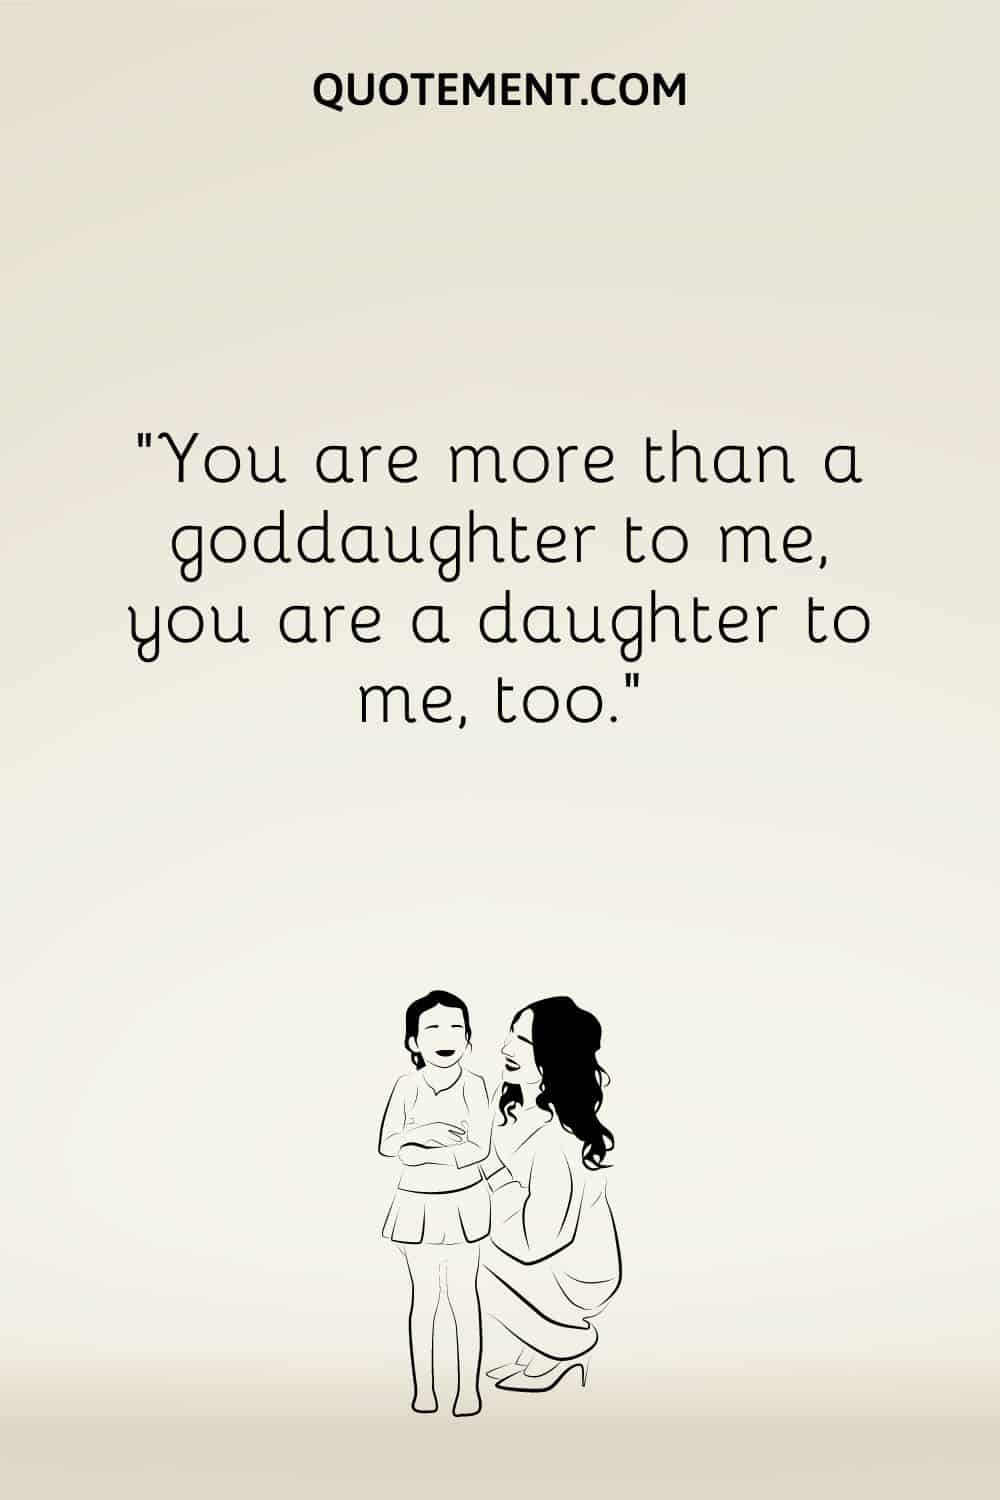 “You are more than a goddaughter to me, you are a daughter to me, too.”